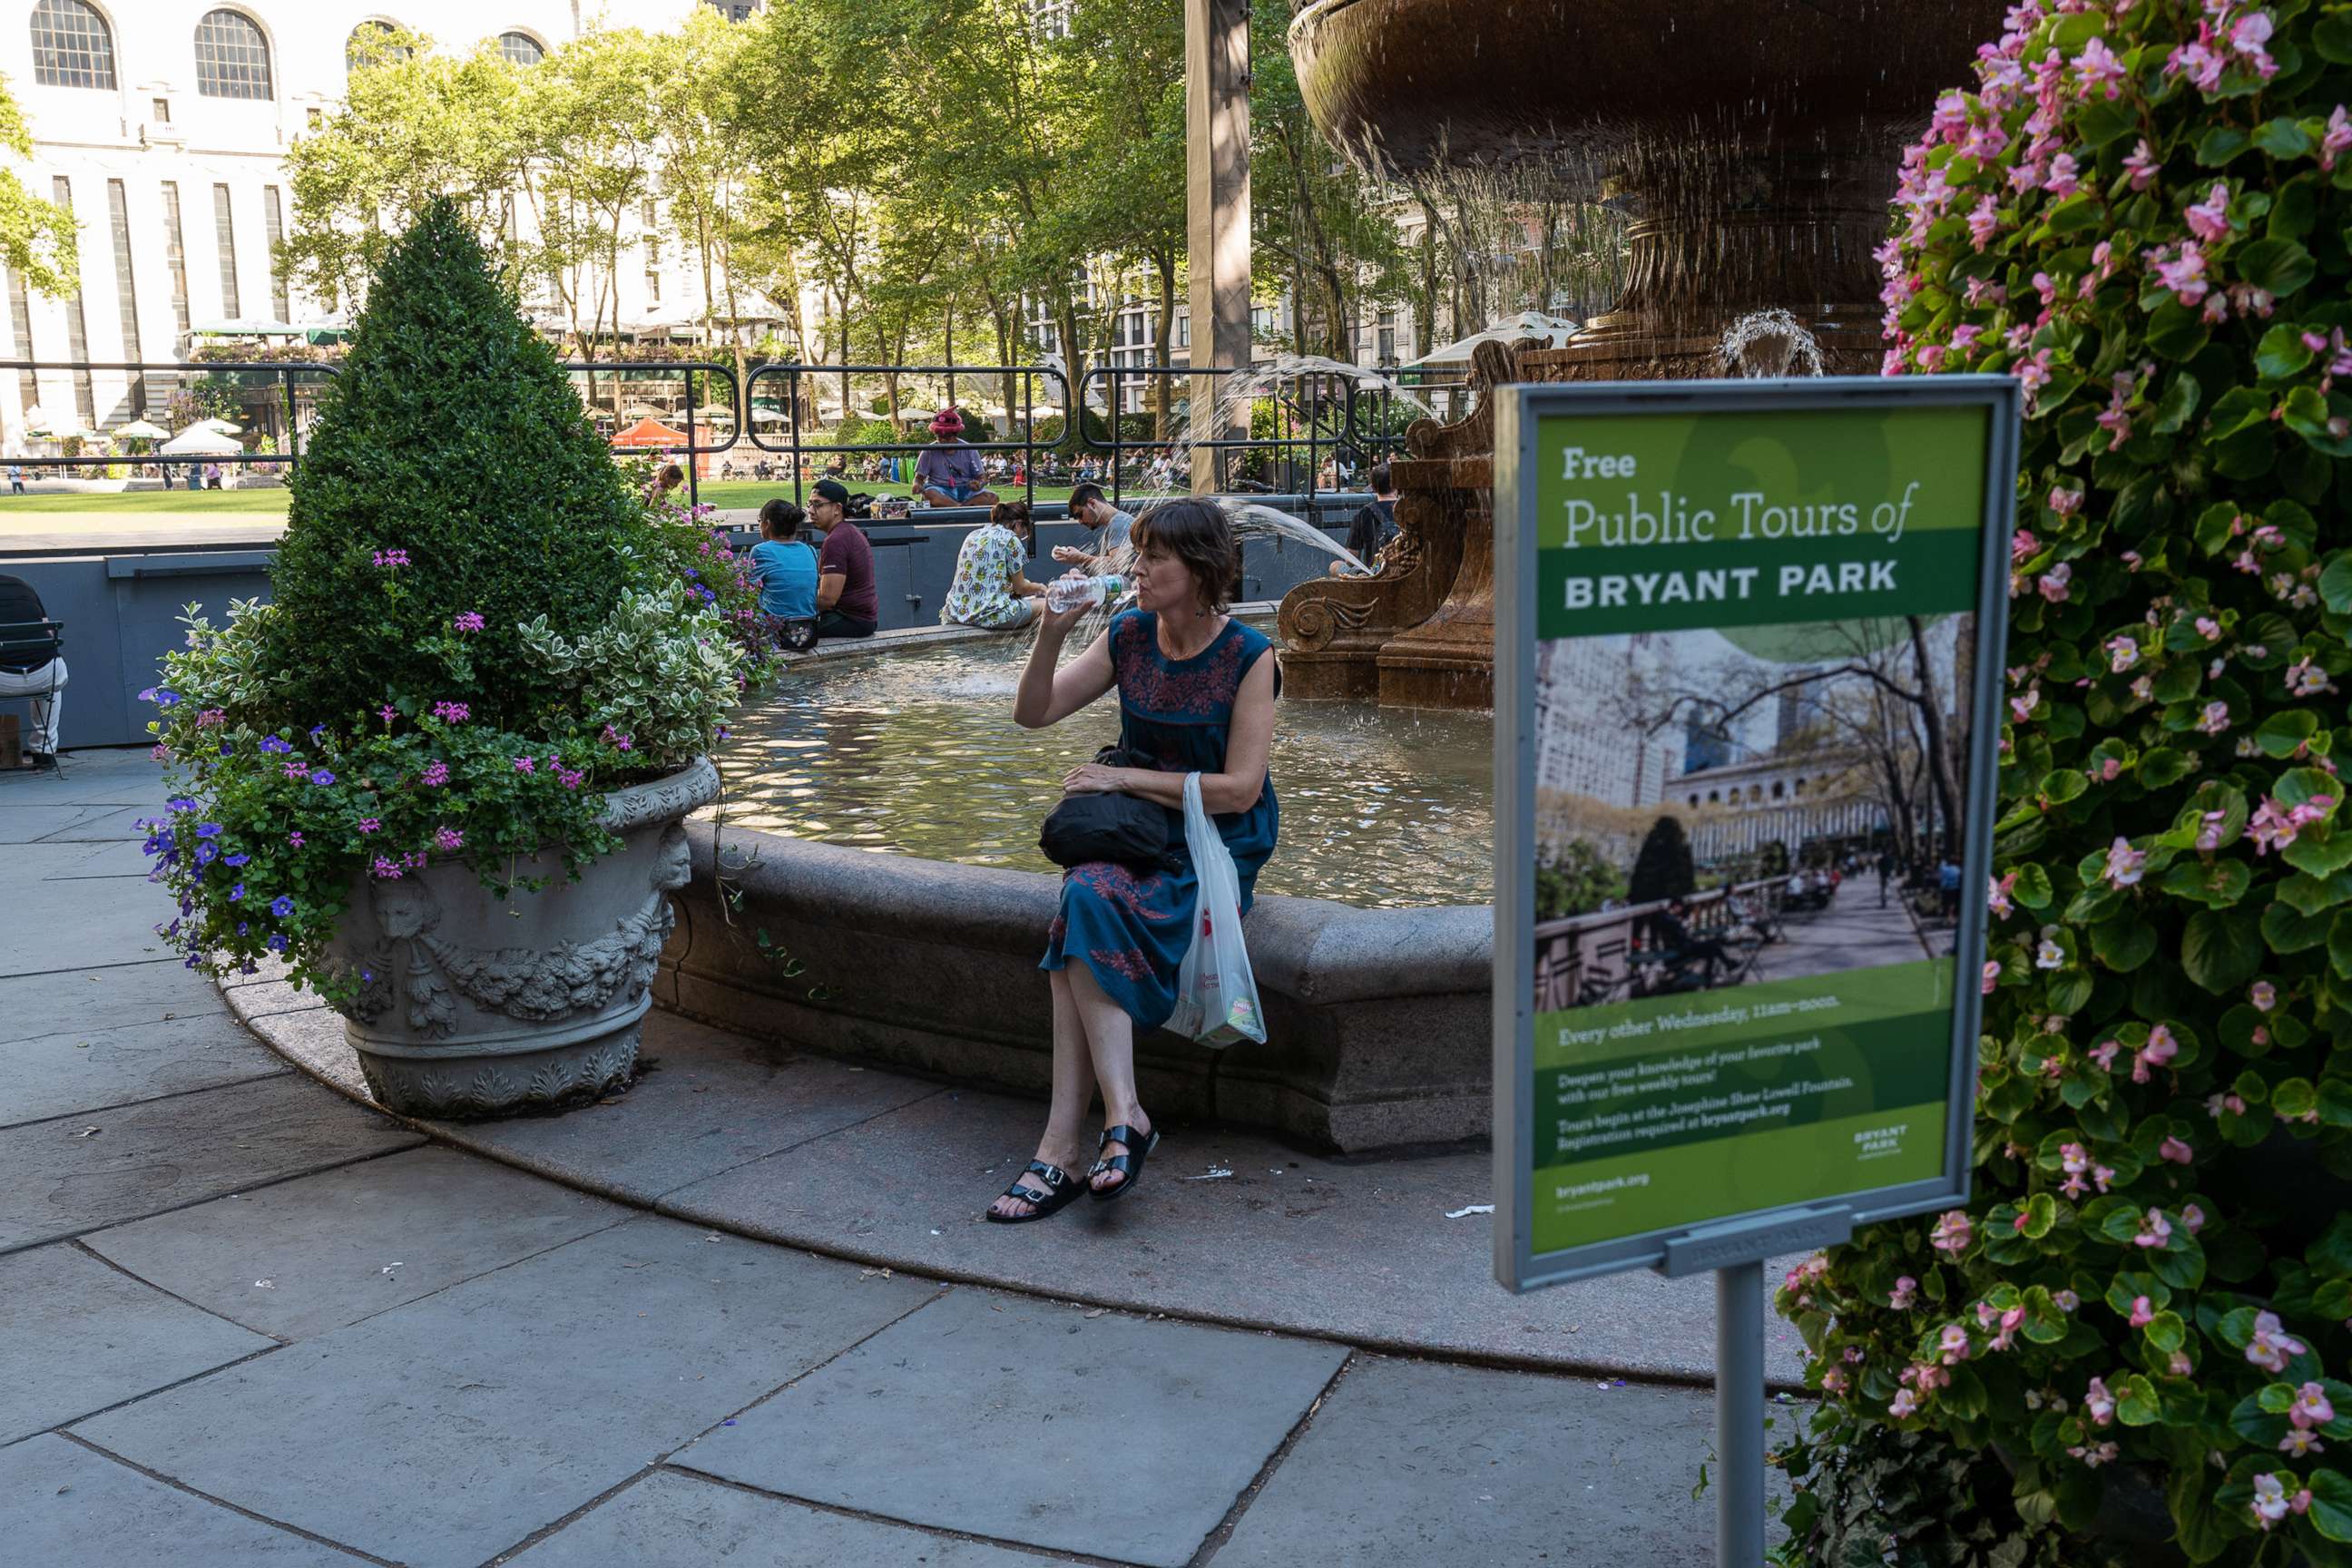 PHOTO: A woman drinks water while sitting in the shade in Bryant Park in midtown Manhattan, Aug. 3, 2022 in New York City.